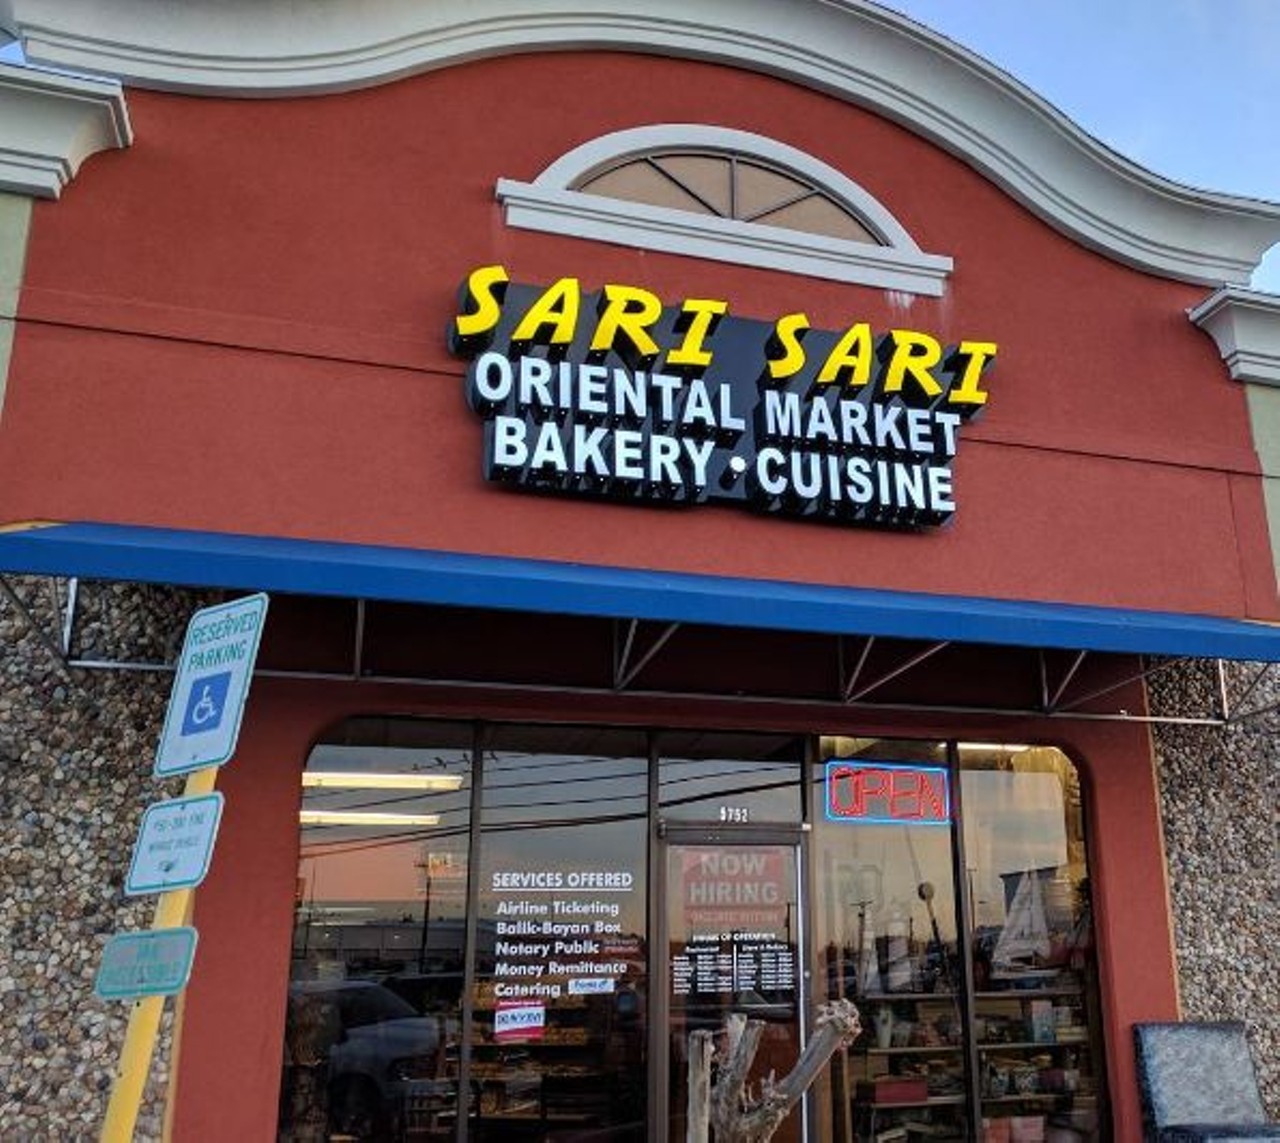 Sari-Sari Filipino Restaurant, Market, & Bakery
5700 Wurzbach Road, (210) 647-7274, sari-sari-satx.com
This hybrid restaurant-market-bakery serves up authentic Filipino fare and lets you try your hand at the cuisine with the help of quality ingredients.
Photo via Instagram / ricosuavehhh